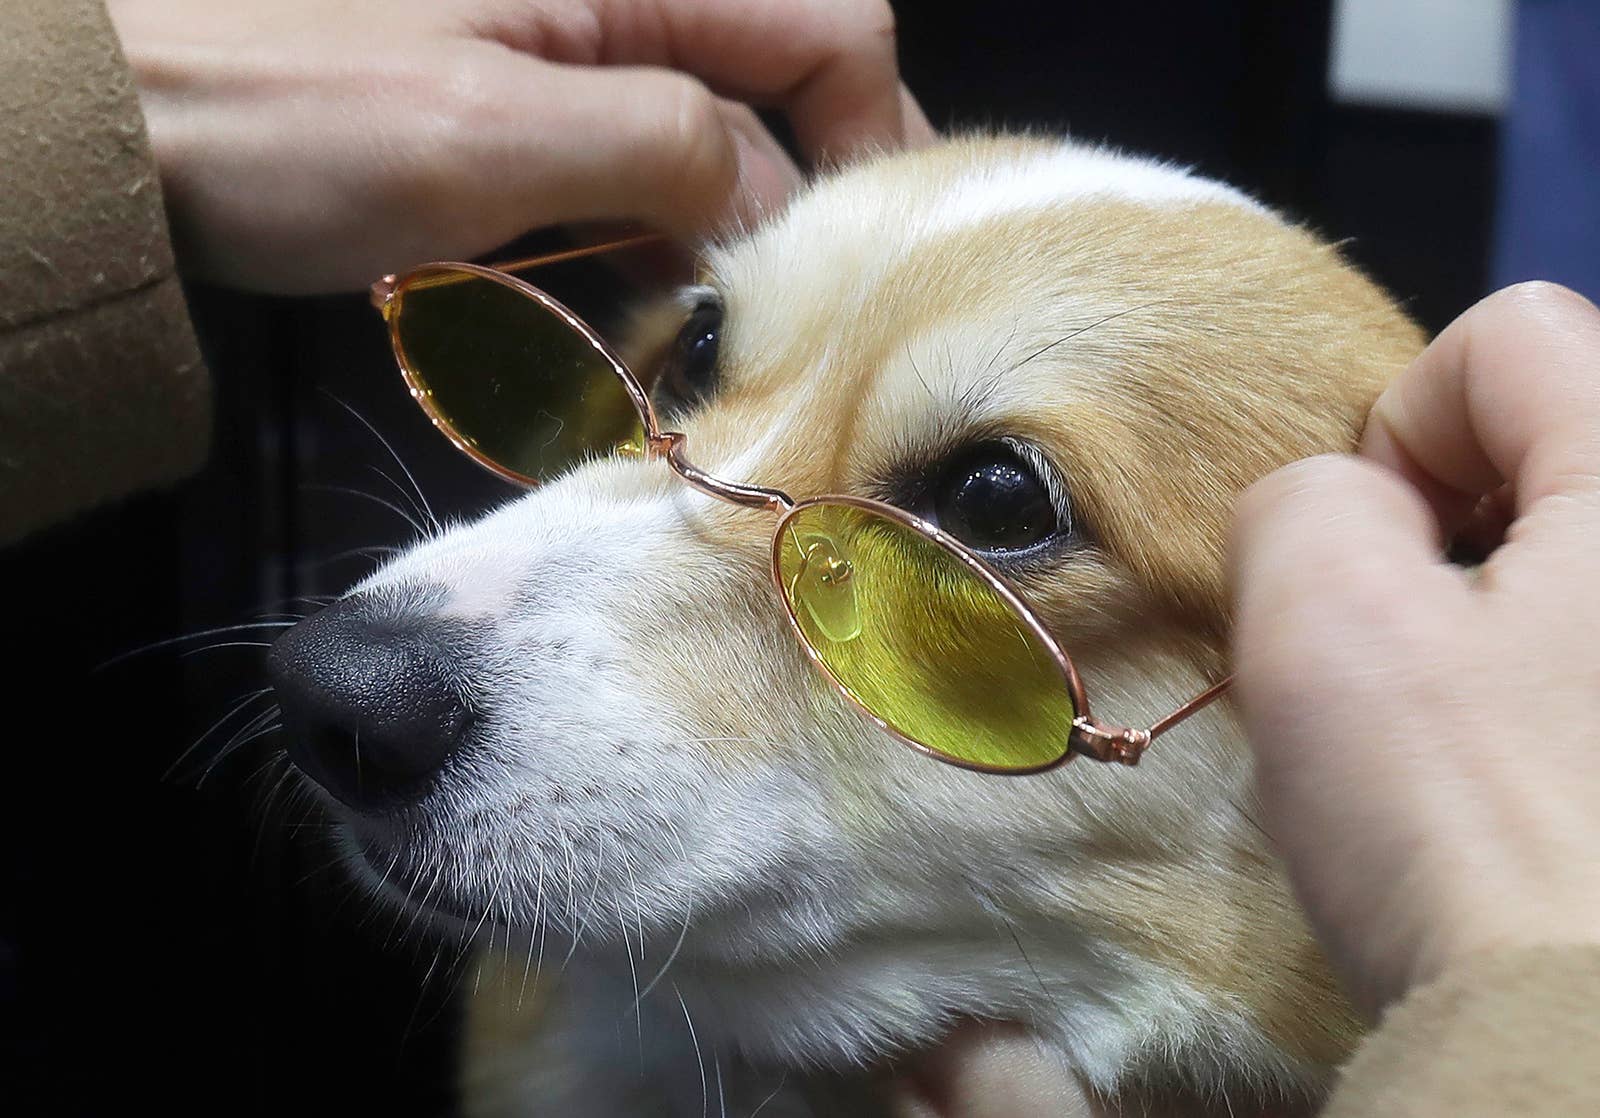 A corgi looks upward wearing glasses with yellow-tinted lenses